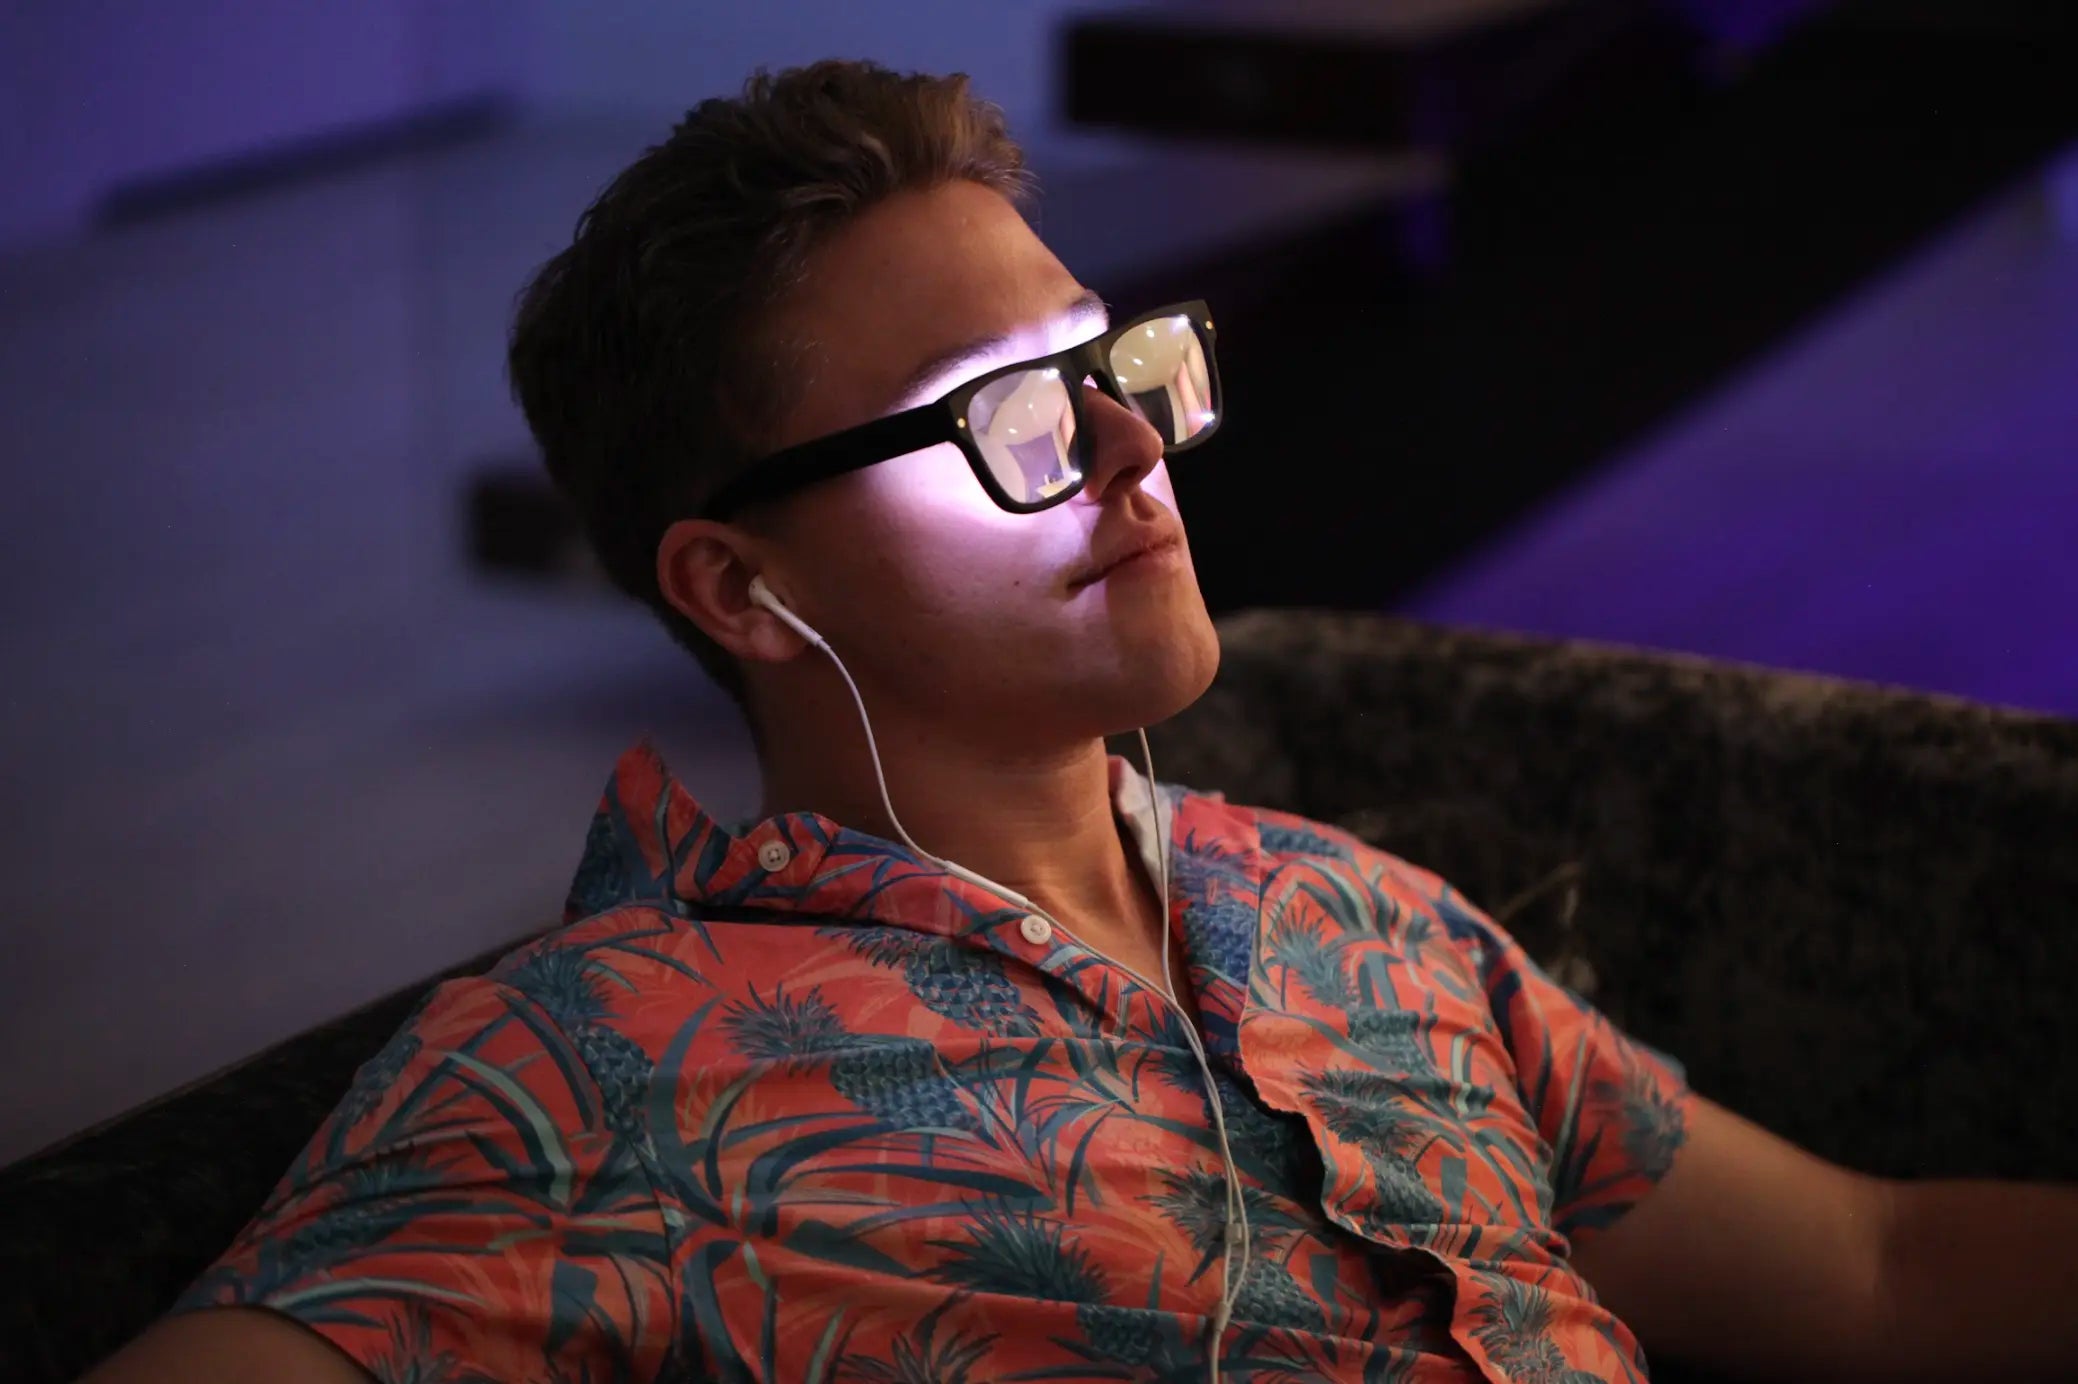 Man listening to music and wearing Healyan Glasses.